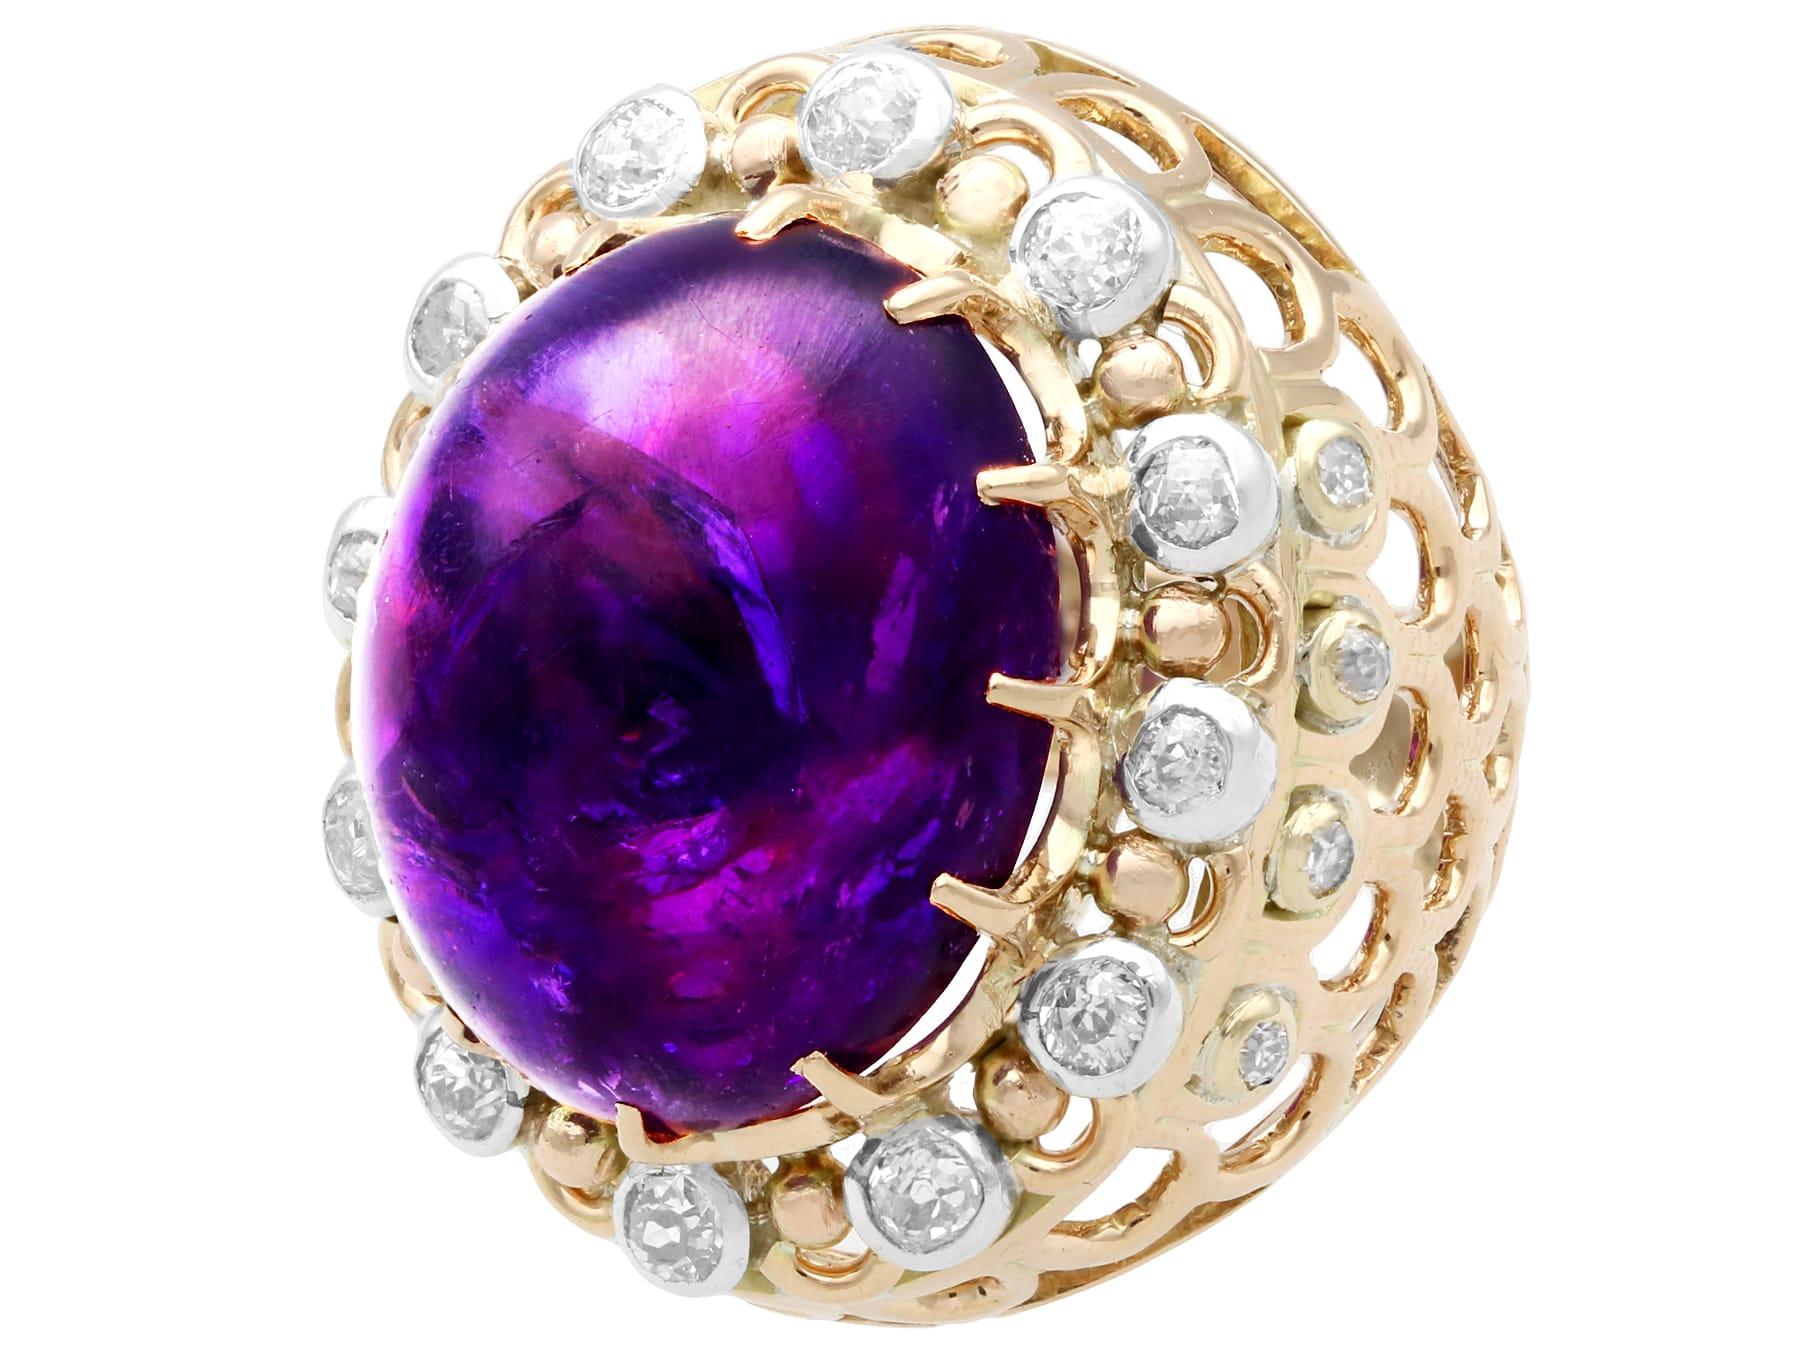 21.43 Carat Cabochon Cut Amethyst and 1.07 Carat Diamond Yellow Gold Ring In Excellent Condition For Sale In Jesmond, Newcastle Upon Tyne